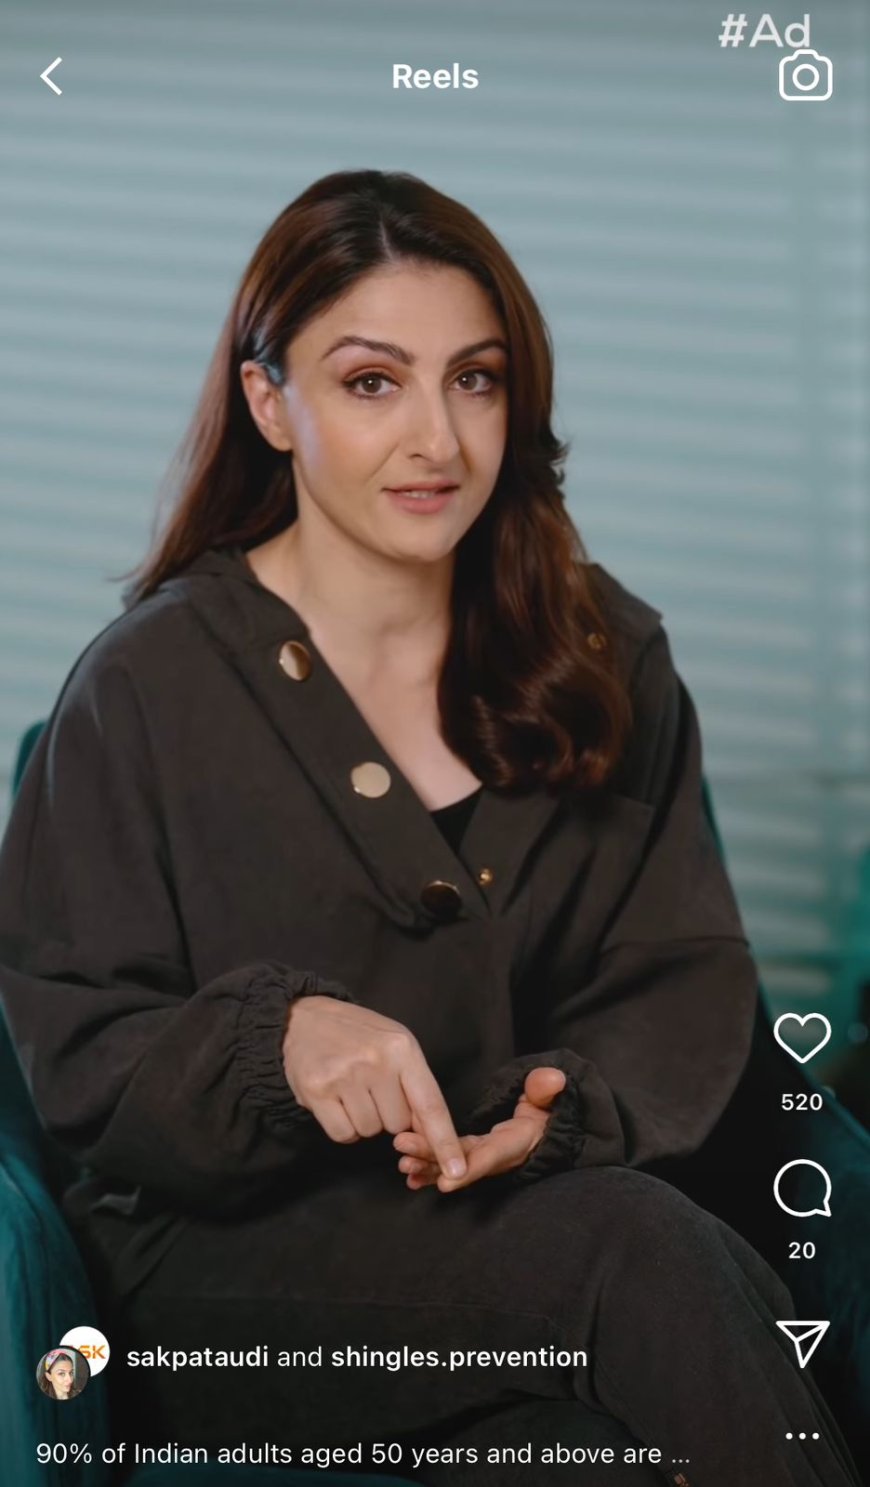 GSK COLLABORATES WITH SOHA ALI KHAN, MILIND SOMAN, NEELAM SONI, AND ROHAN BOPANNA FOR ‘PROJECT 90’ TO RAISE SHINGLES AWARENESS